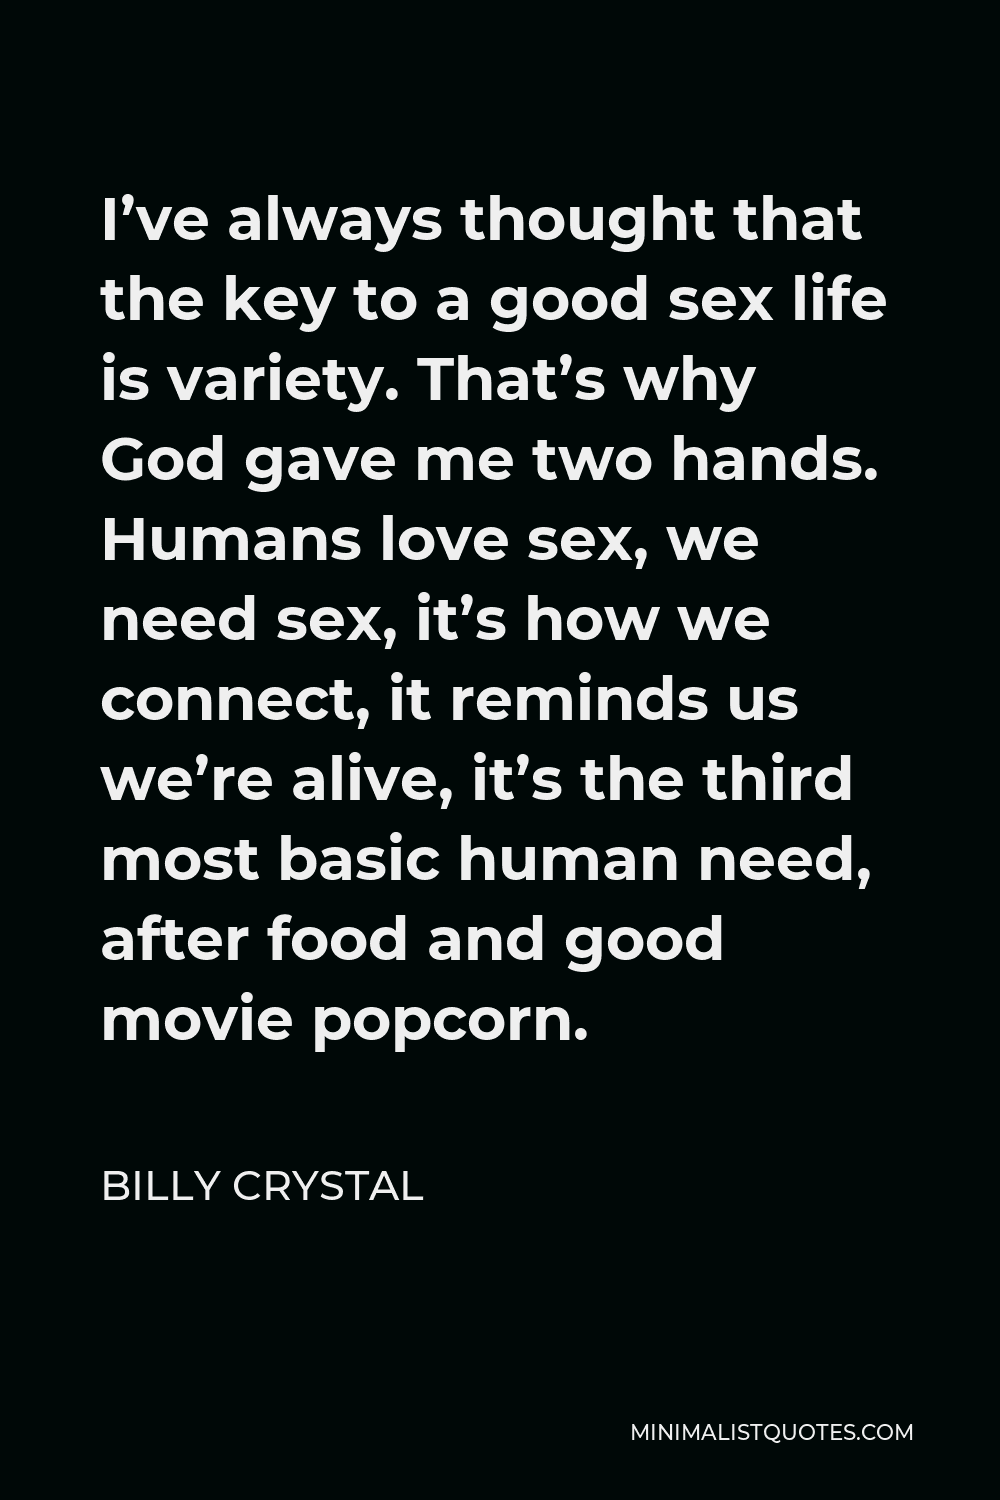 Billy Crystal Quote - I’ve always thought that the key to a good sex life is variety. That’s why God gave me two hands. Humans love sex, we need sex, it’s how we connect, it reminds us we’re alive, it’s the third most basic human need, after food and good movie popcorn.